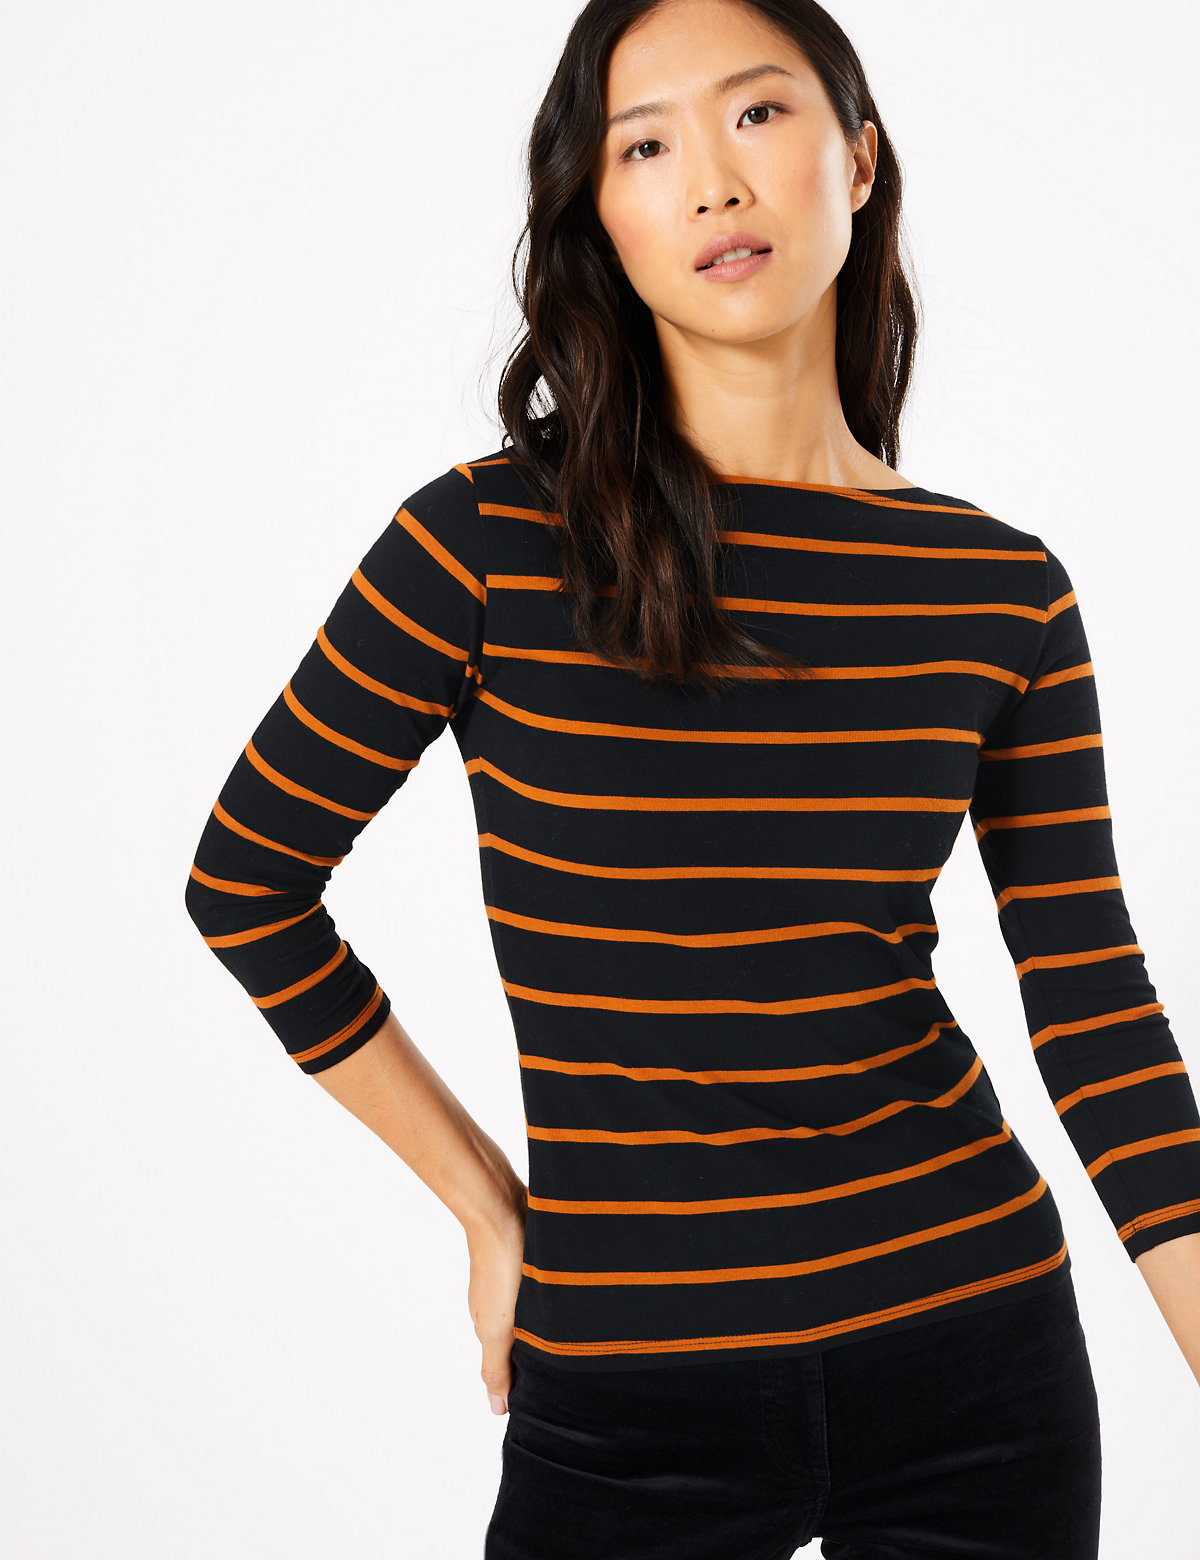 Cotton Rich Striped Fitted T-Shirt